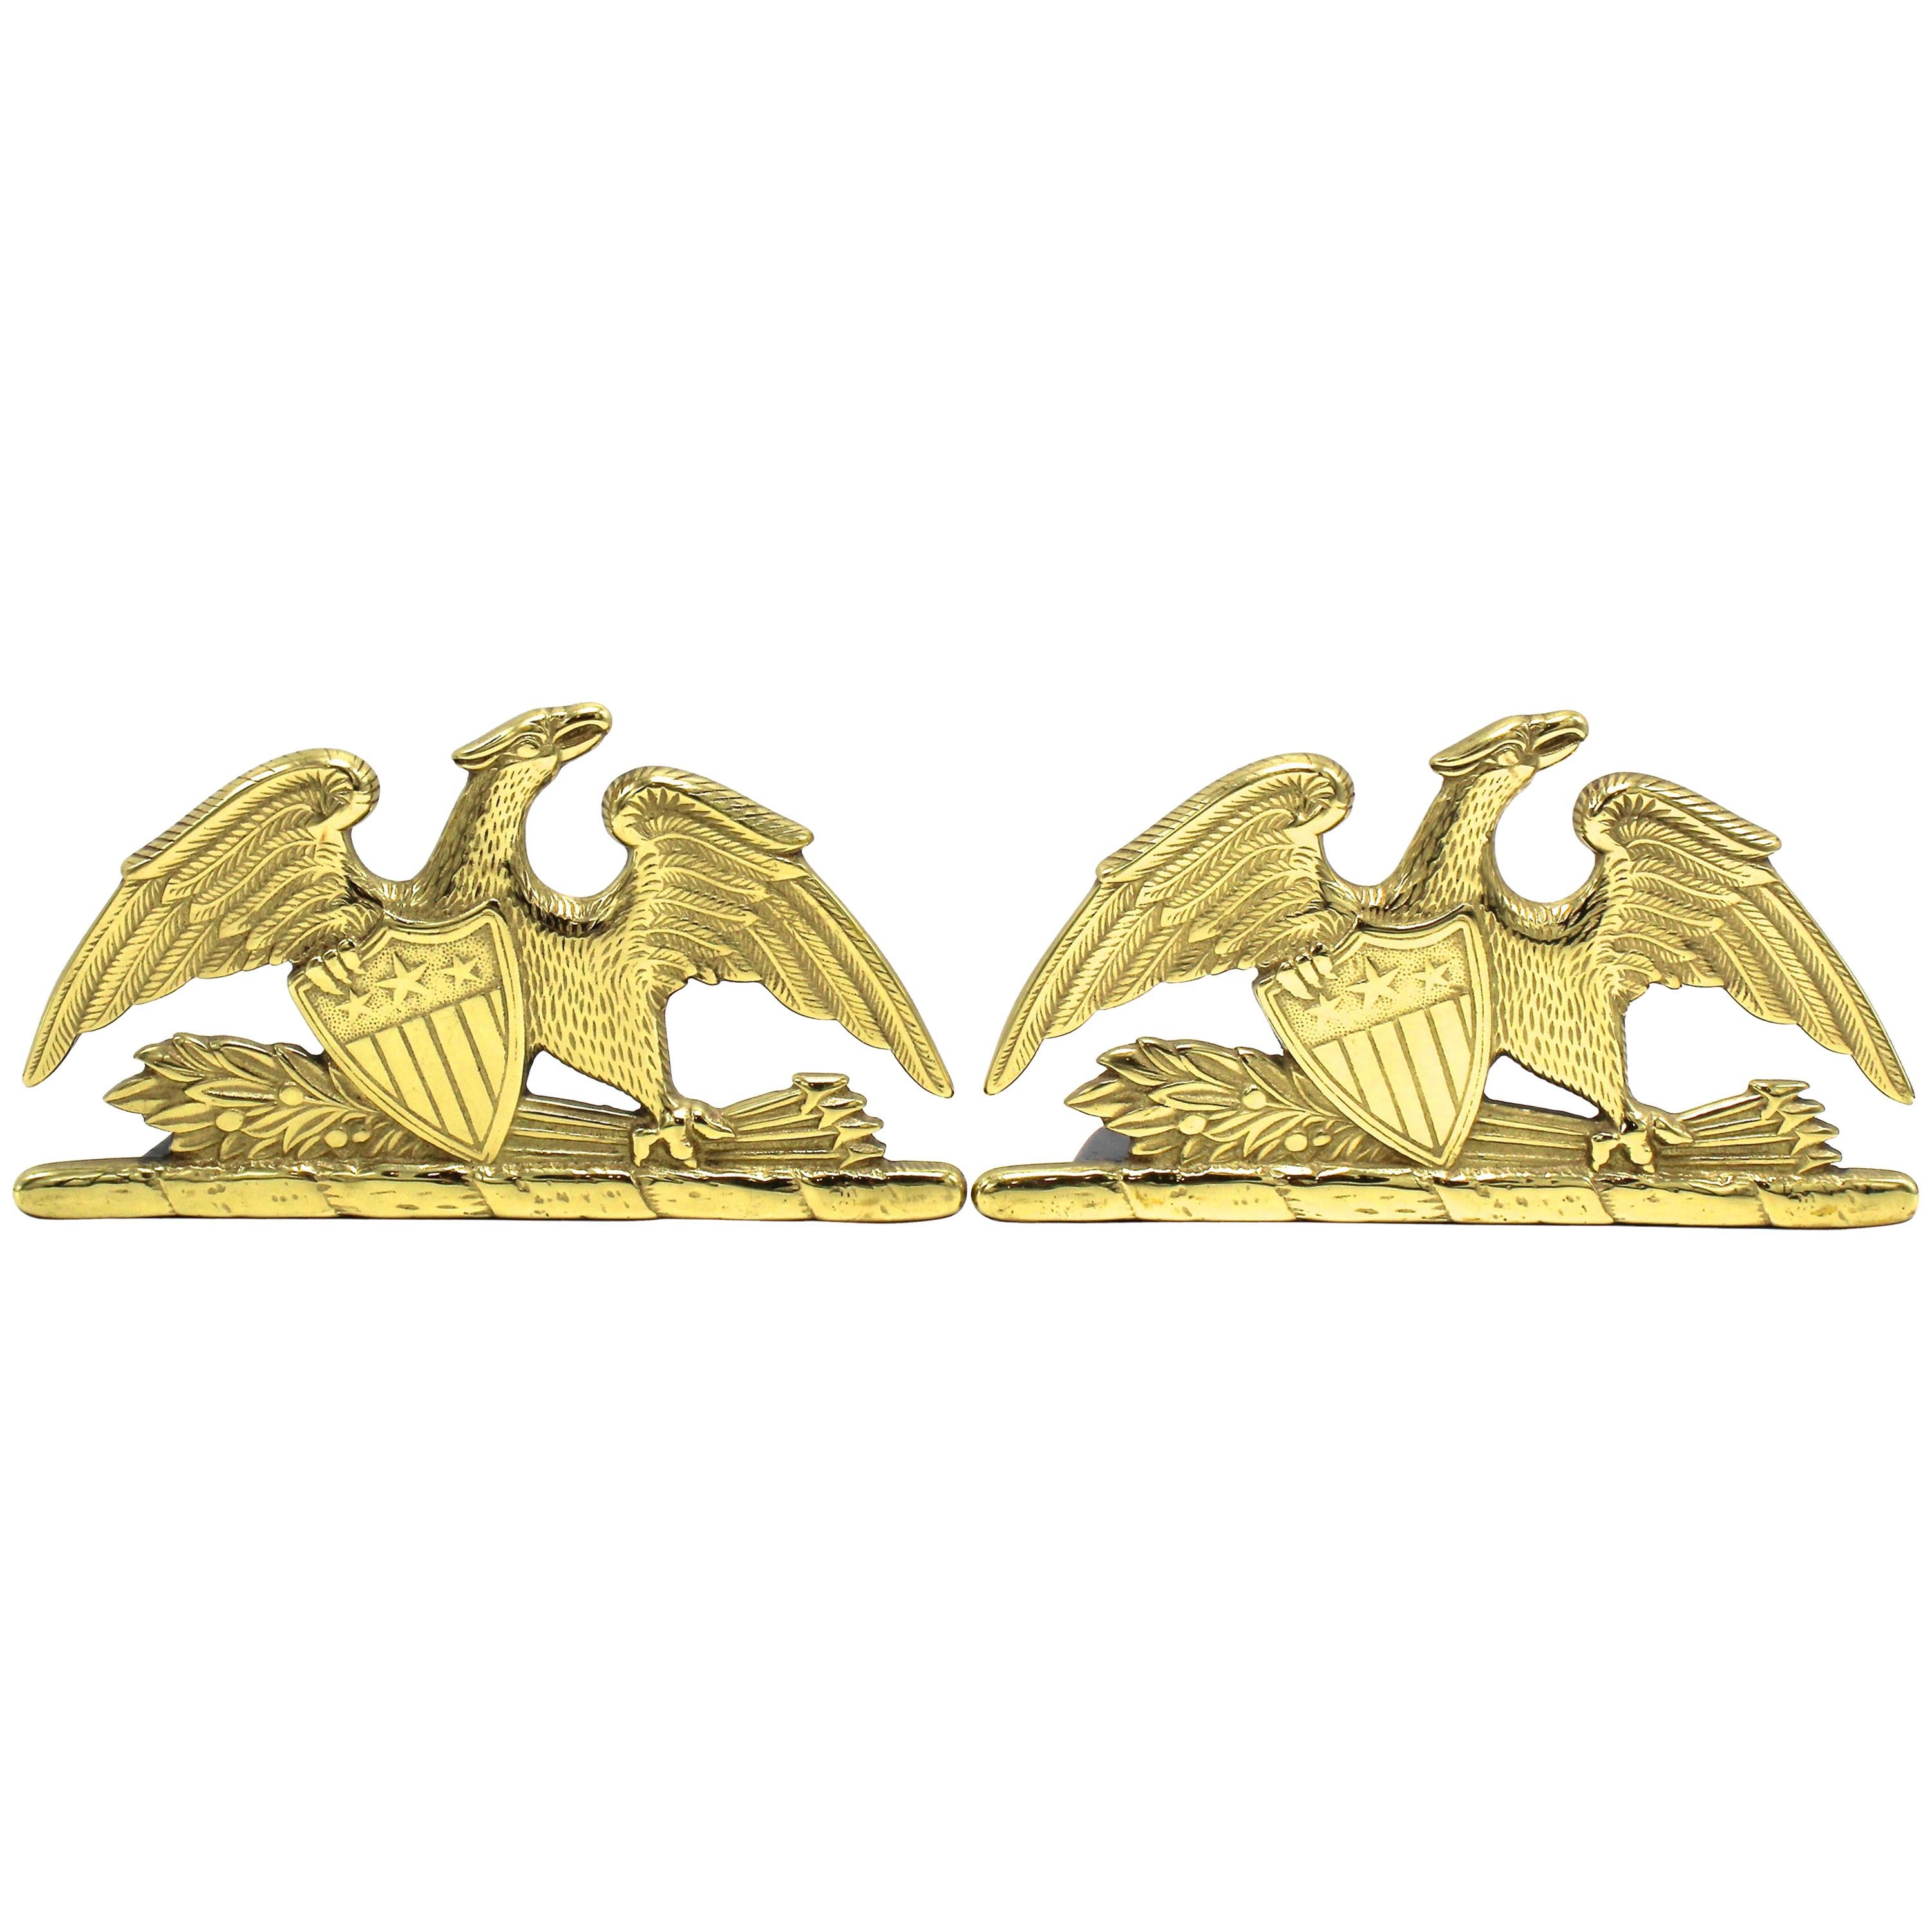 1952 Brass Spread Eagle Bookends by Virginia Metalcrafters